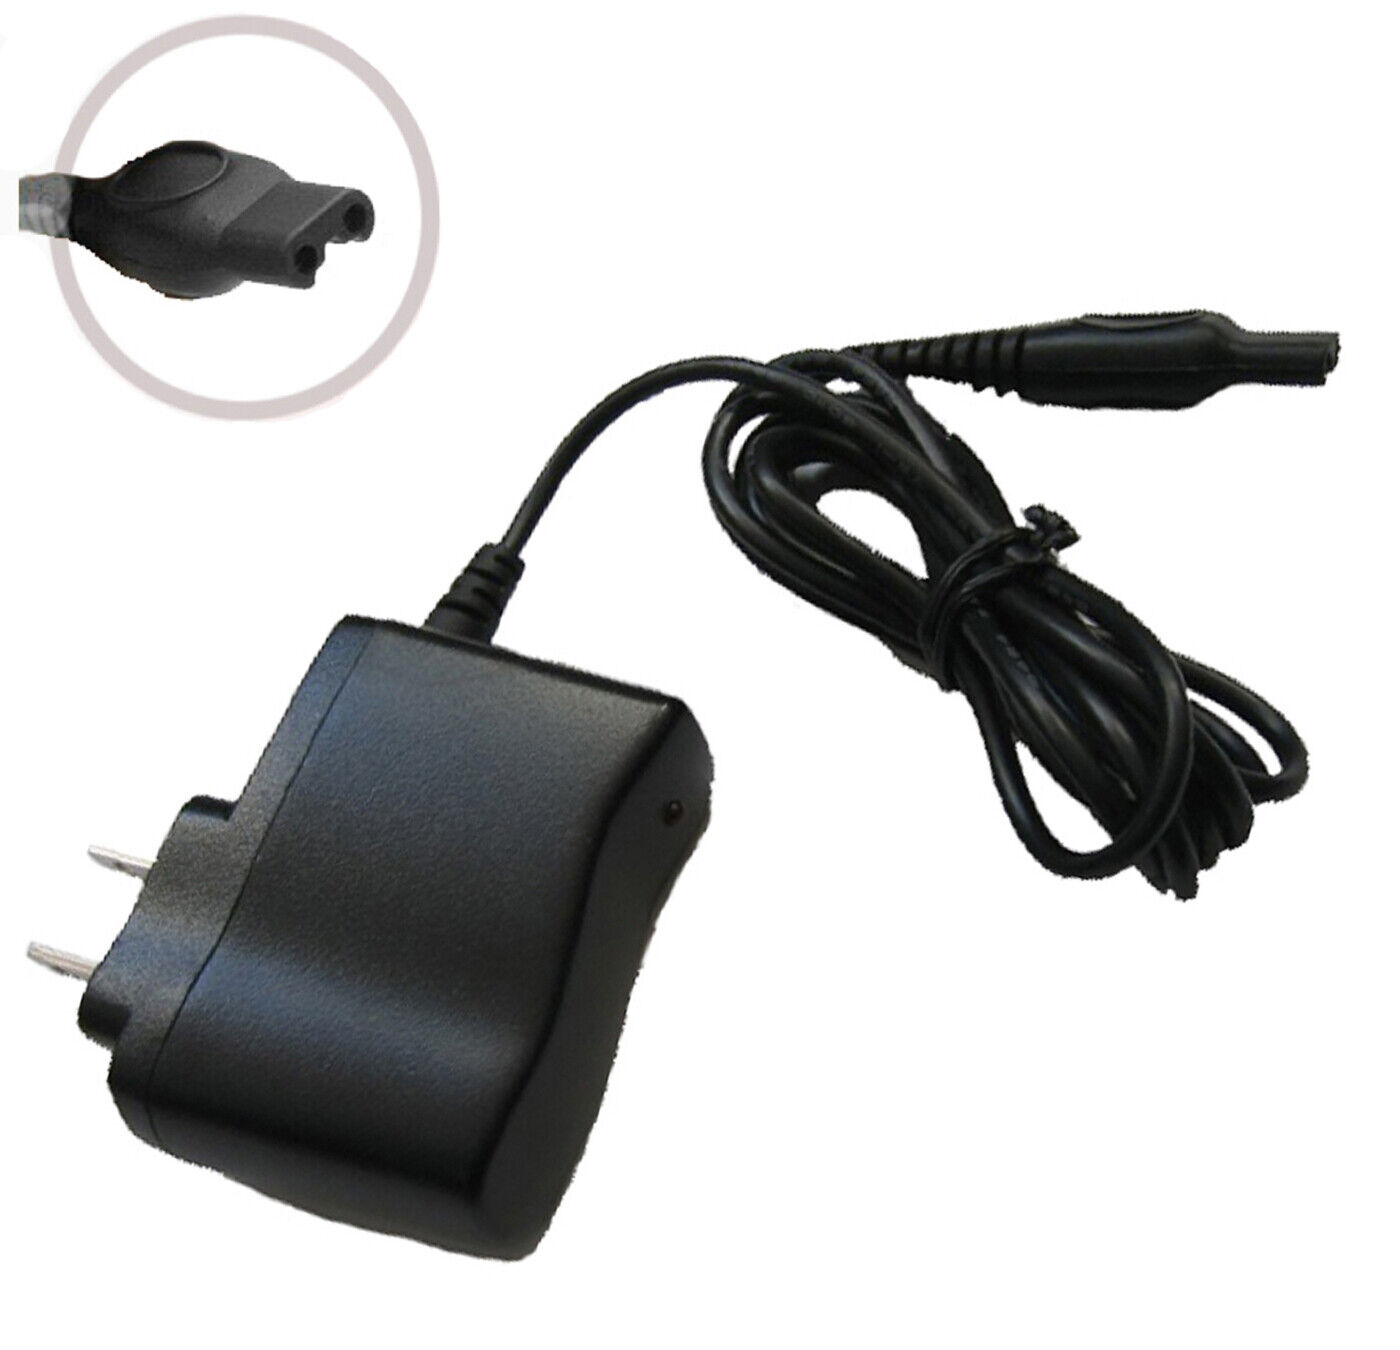 AC DC Adapter For Philips Norelco 5150 S5074 Series 5000 Electric Shaver Trimmer